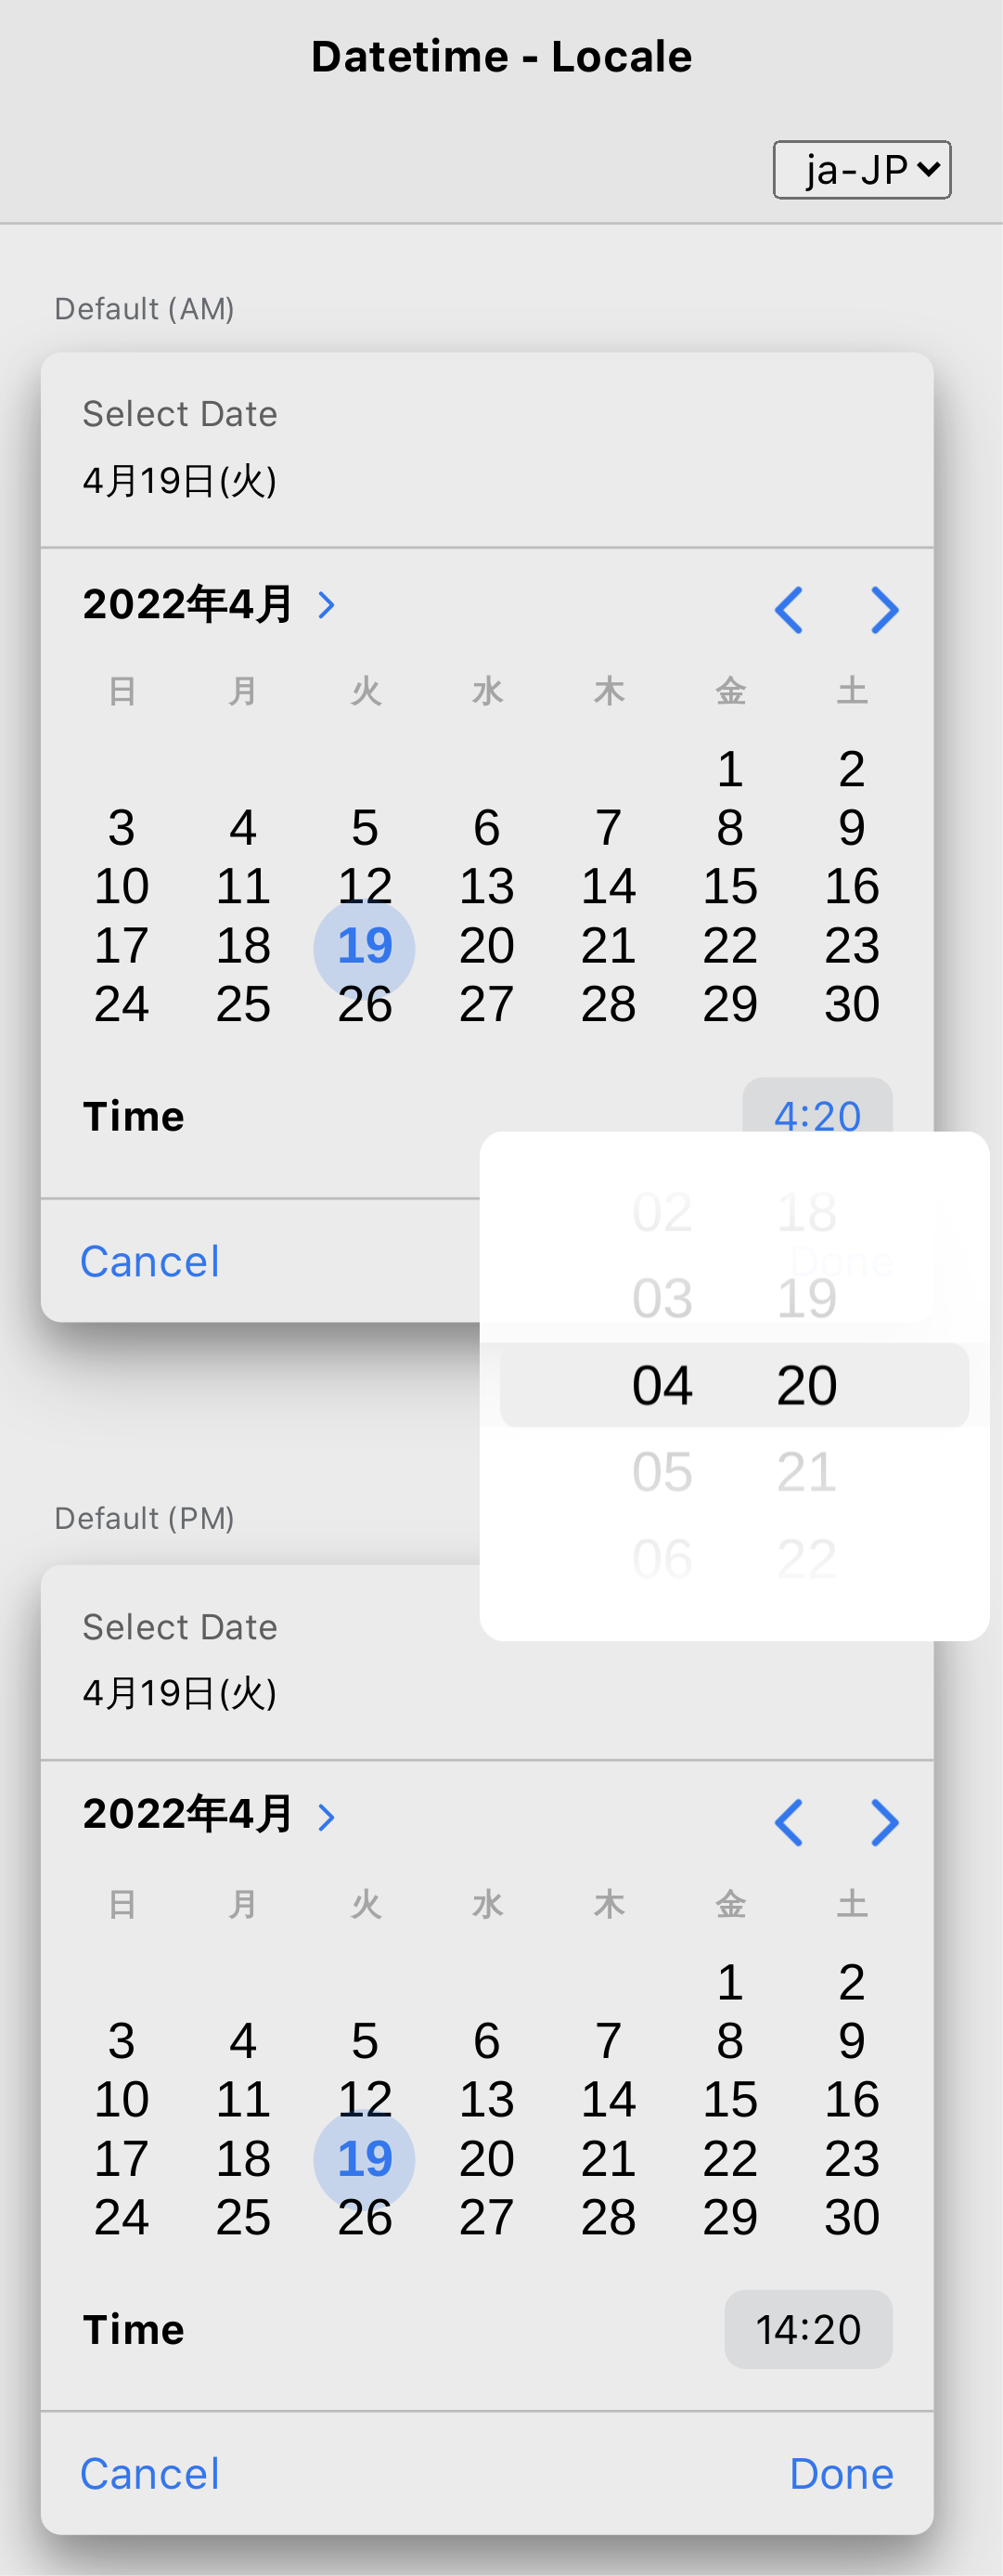 datetime-locale-ja-JP-time-diff-ios-ltr-Mobile-Chrome-linux.png